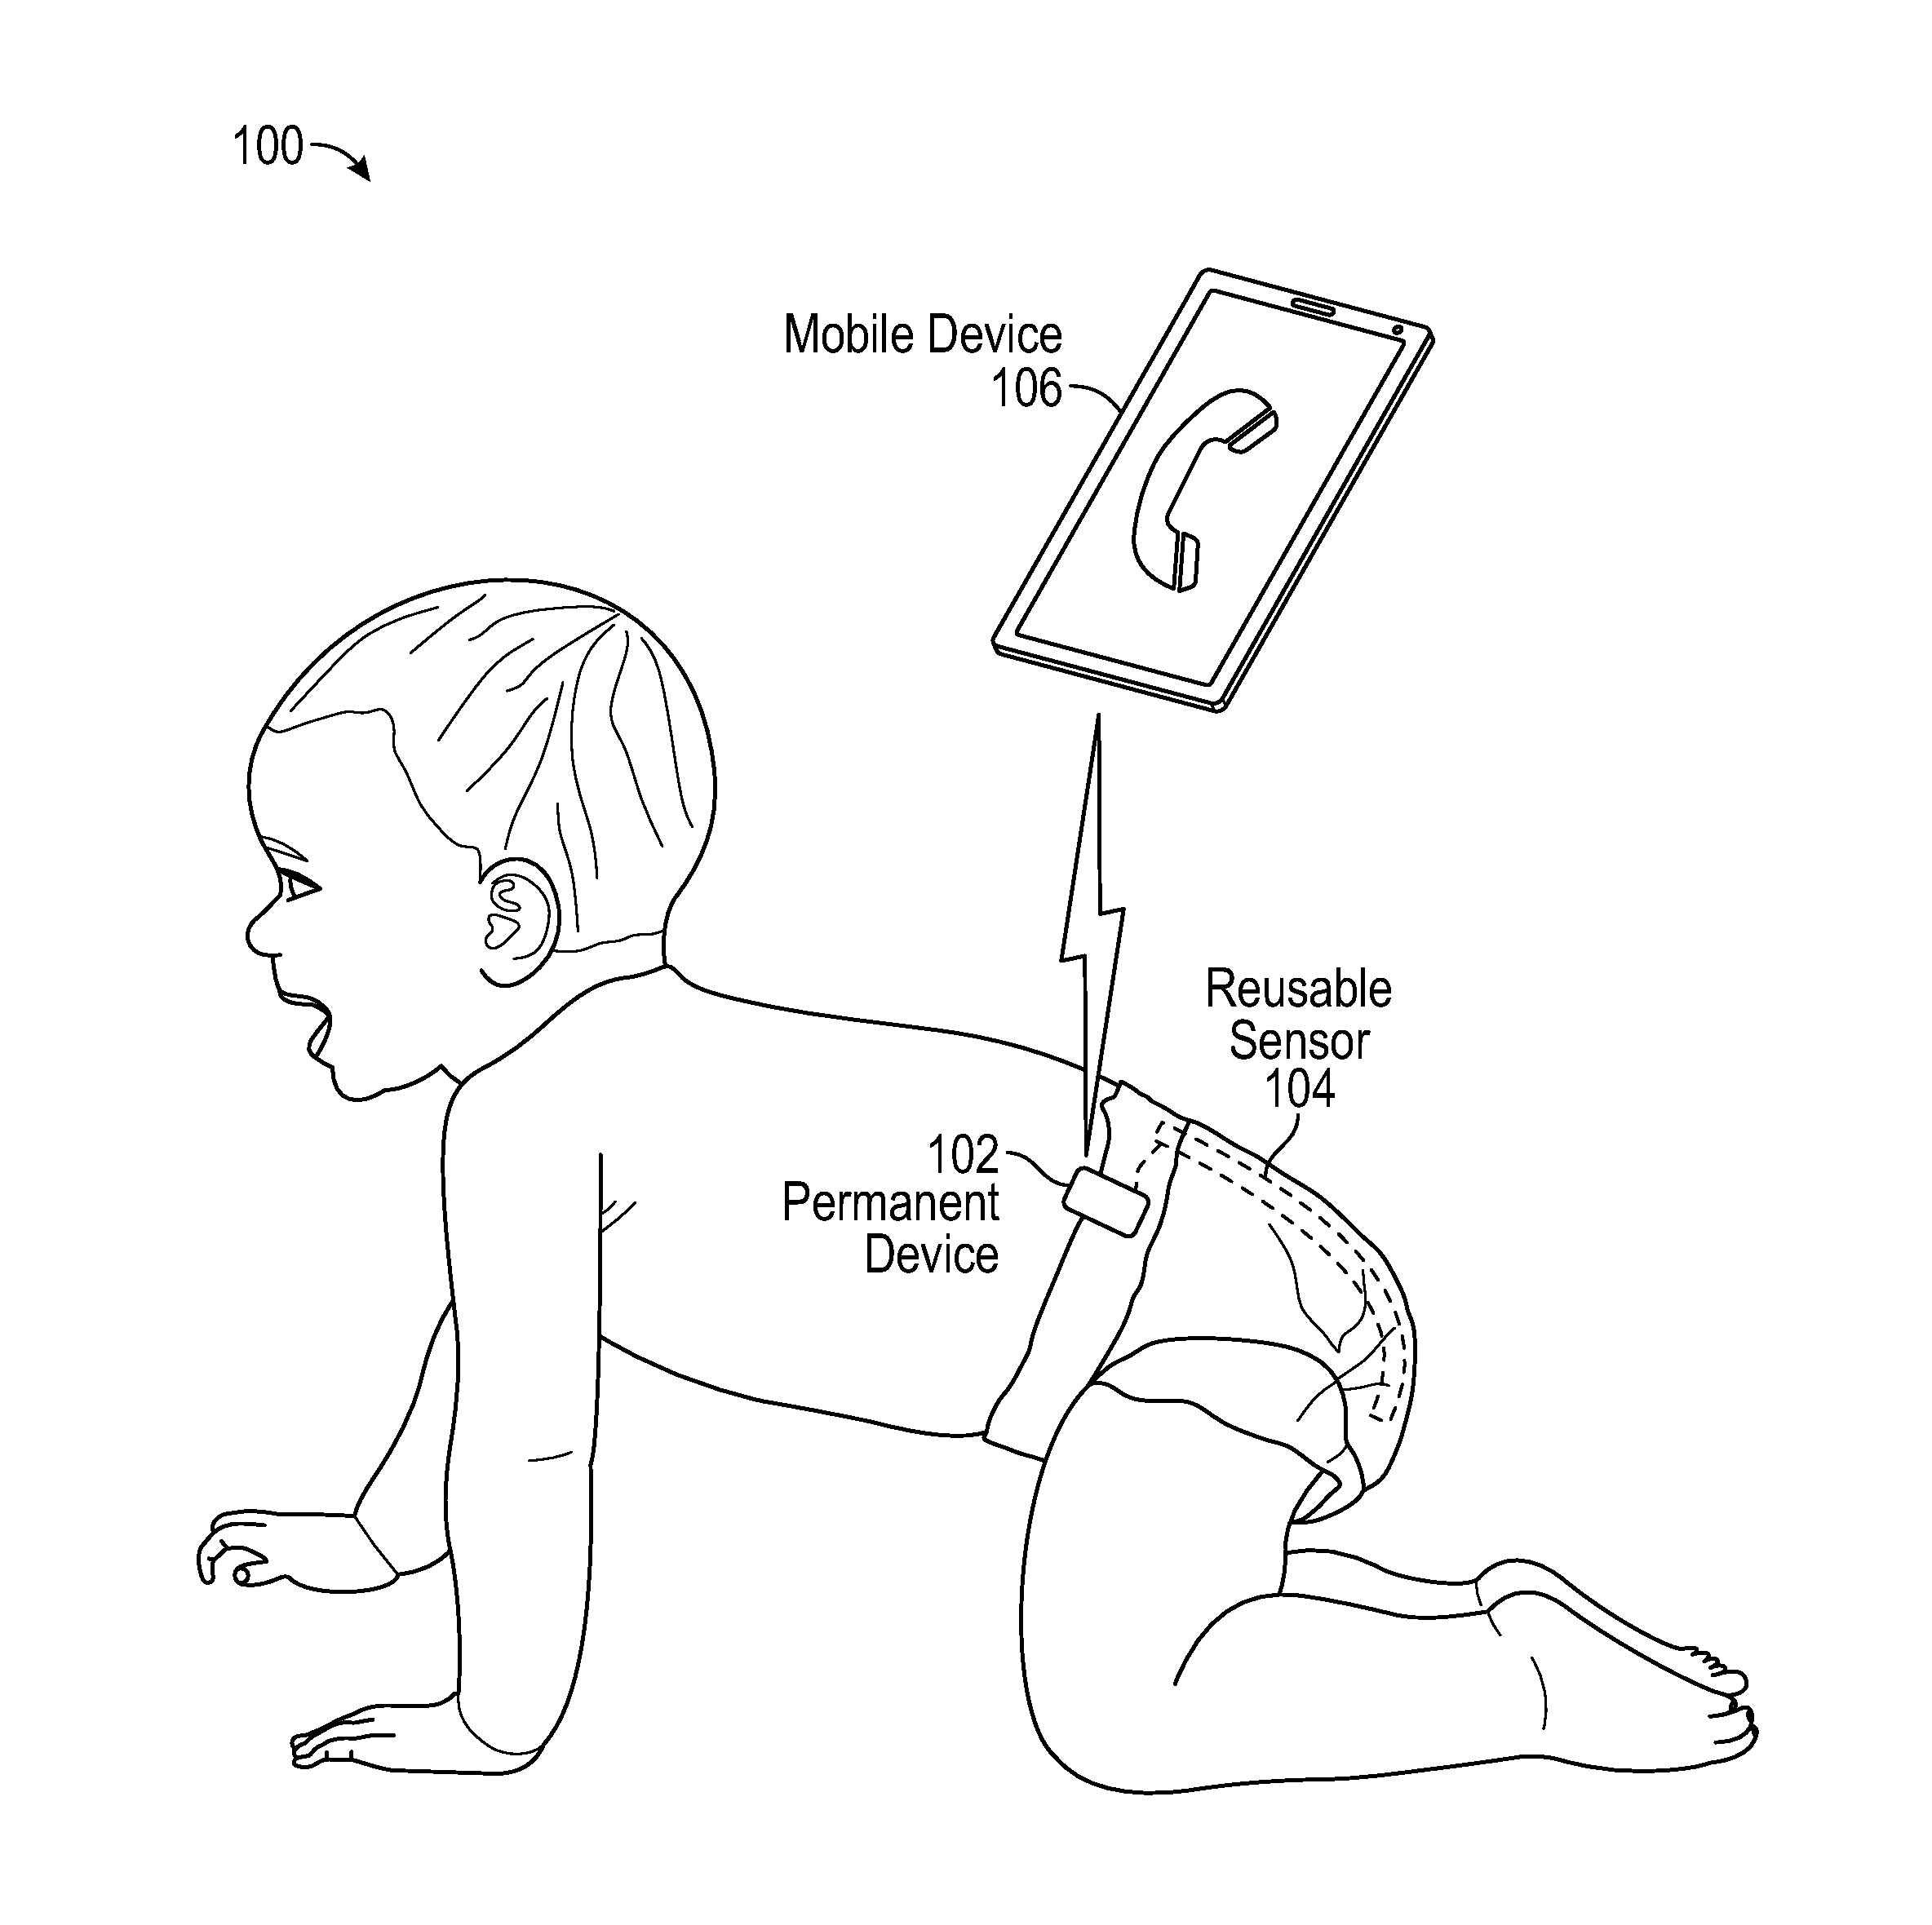 System and methods for monitoring defecation, urination, near-body temperature, body posture and body movements in young children, patients and elderlies